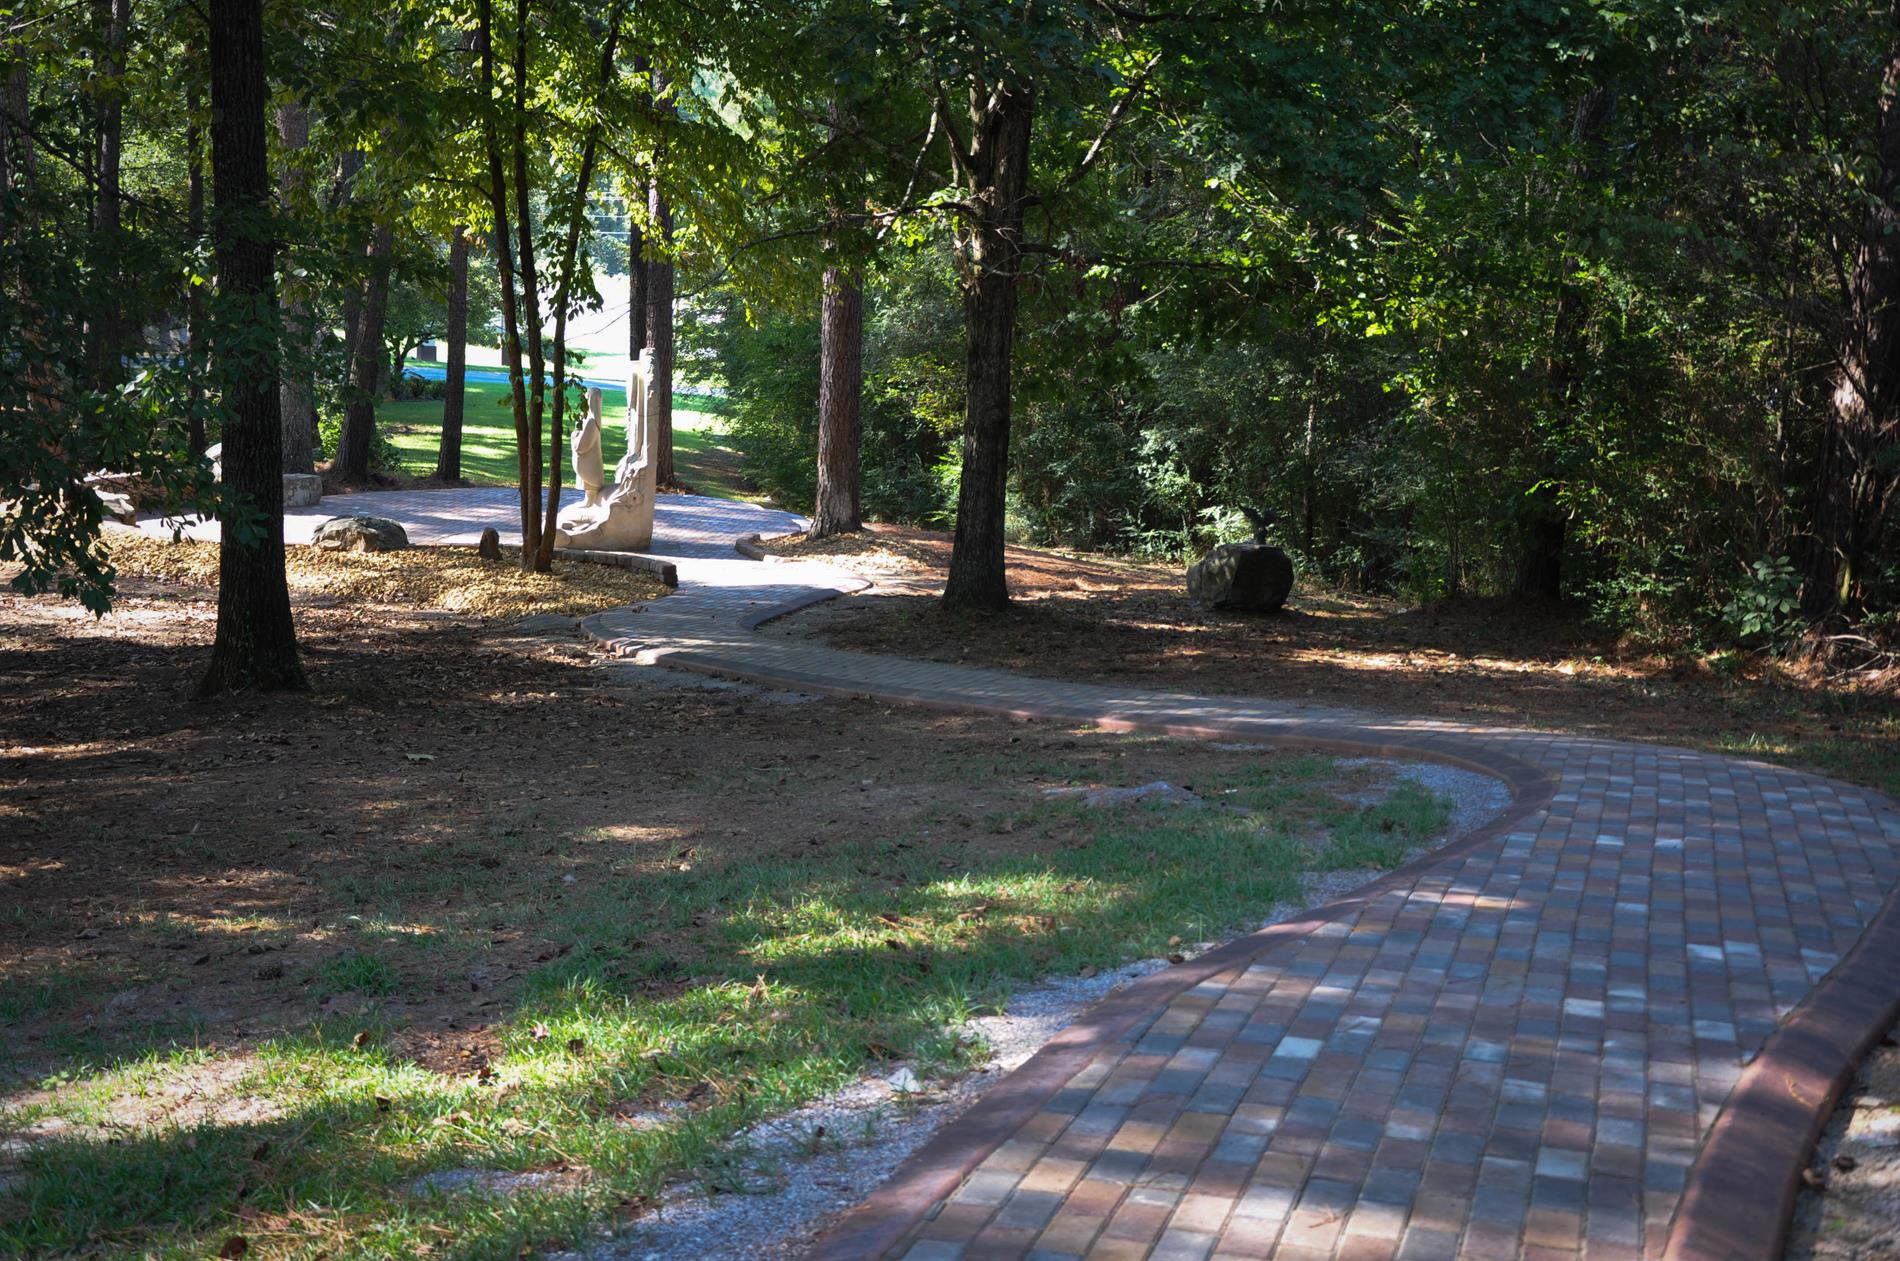 More pathway pictures